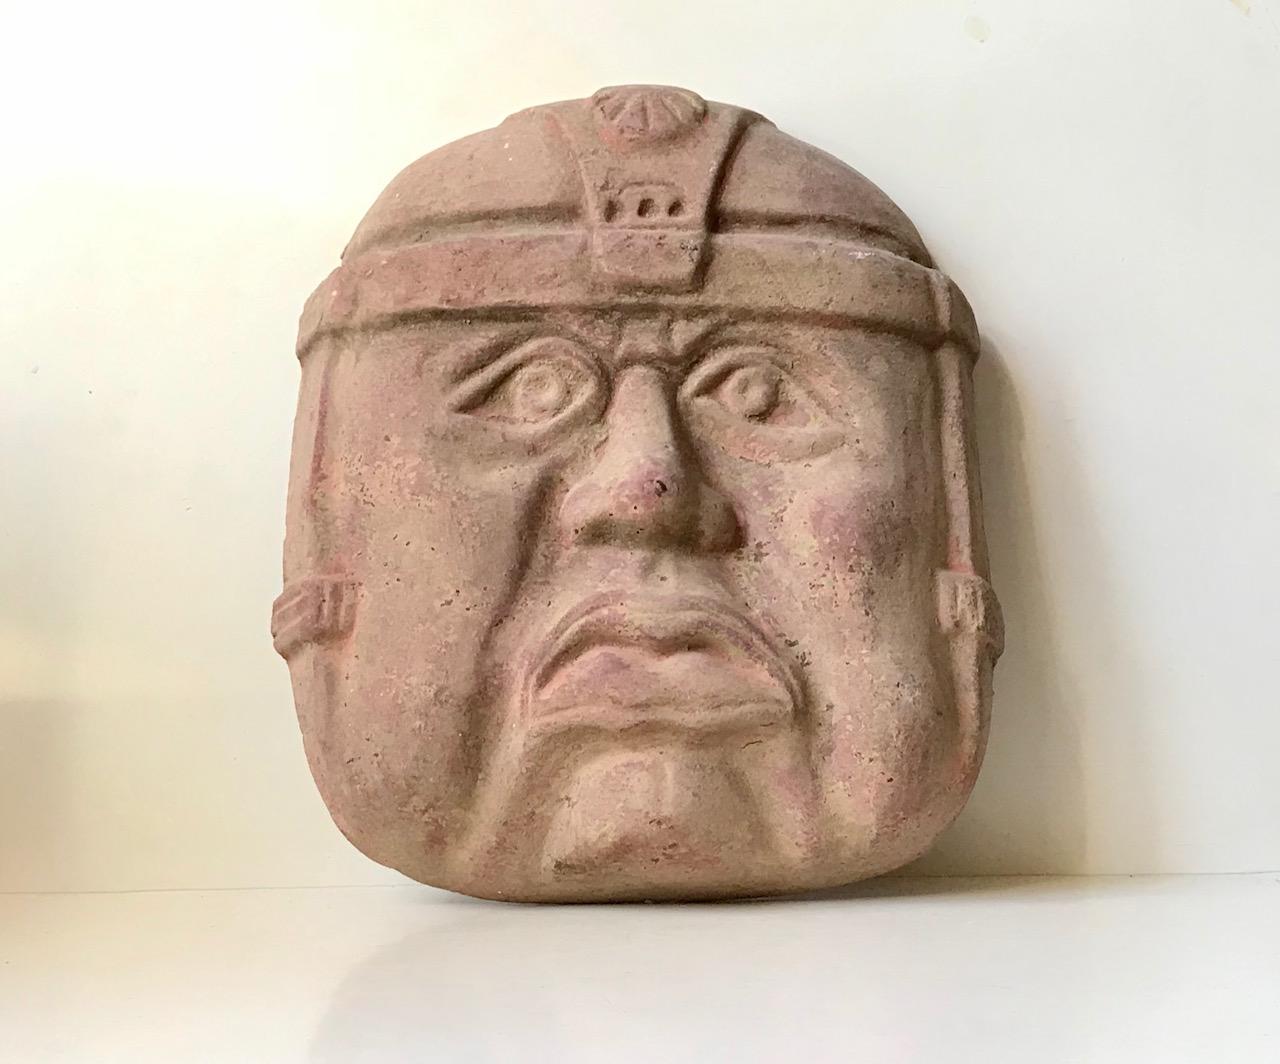 Large (43x36x10 cm) raw terracotta wall mask of an Olmec Warrior. The Olmec's was a pre-culumbian, Mesoamerican civilisation that lived from 1200-400 bc. This particular example is a reproduction dating from the 1970s where it was brought home from